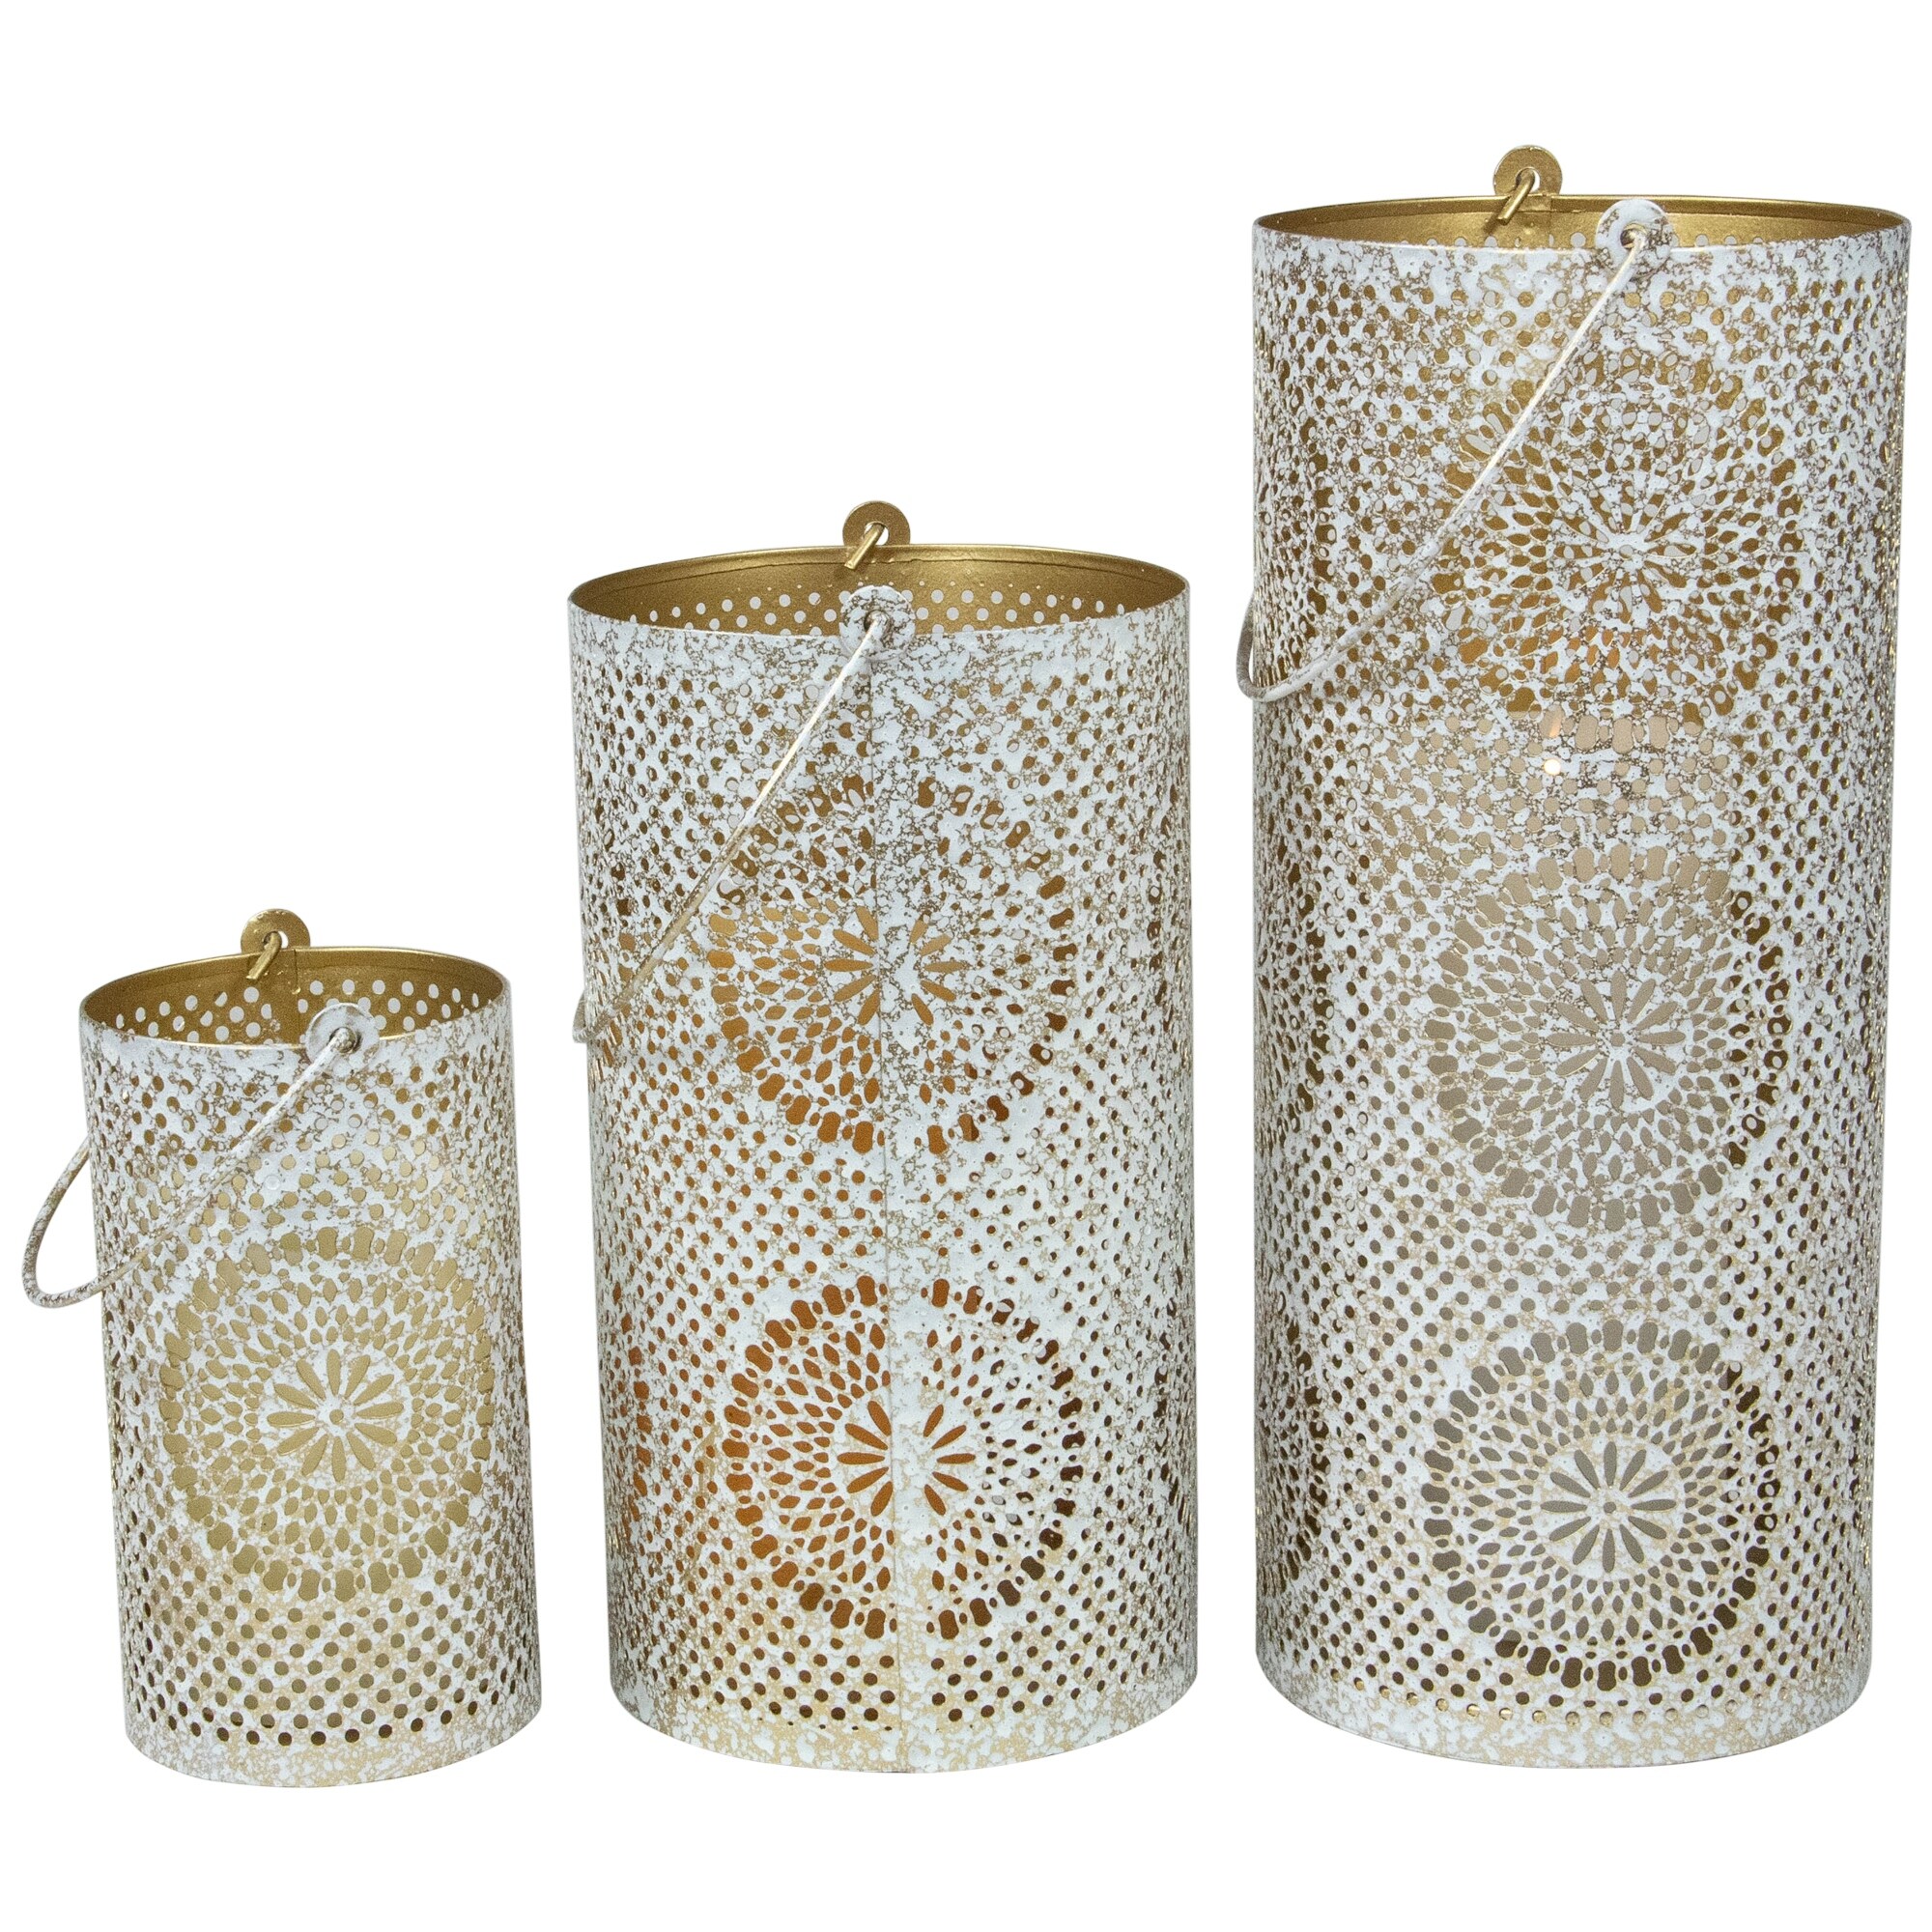 Candle Hurricane Lantern, For Table Top, Mantle, Wall Hanging, or Garden  Display, Indoor & Outdoor Use, Gold